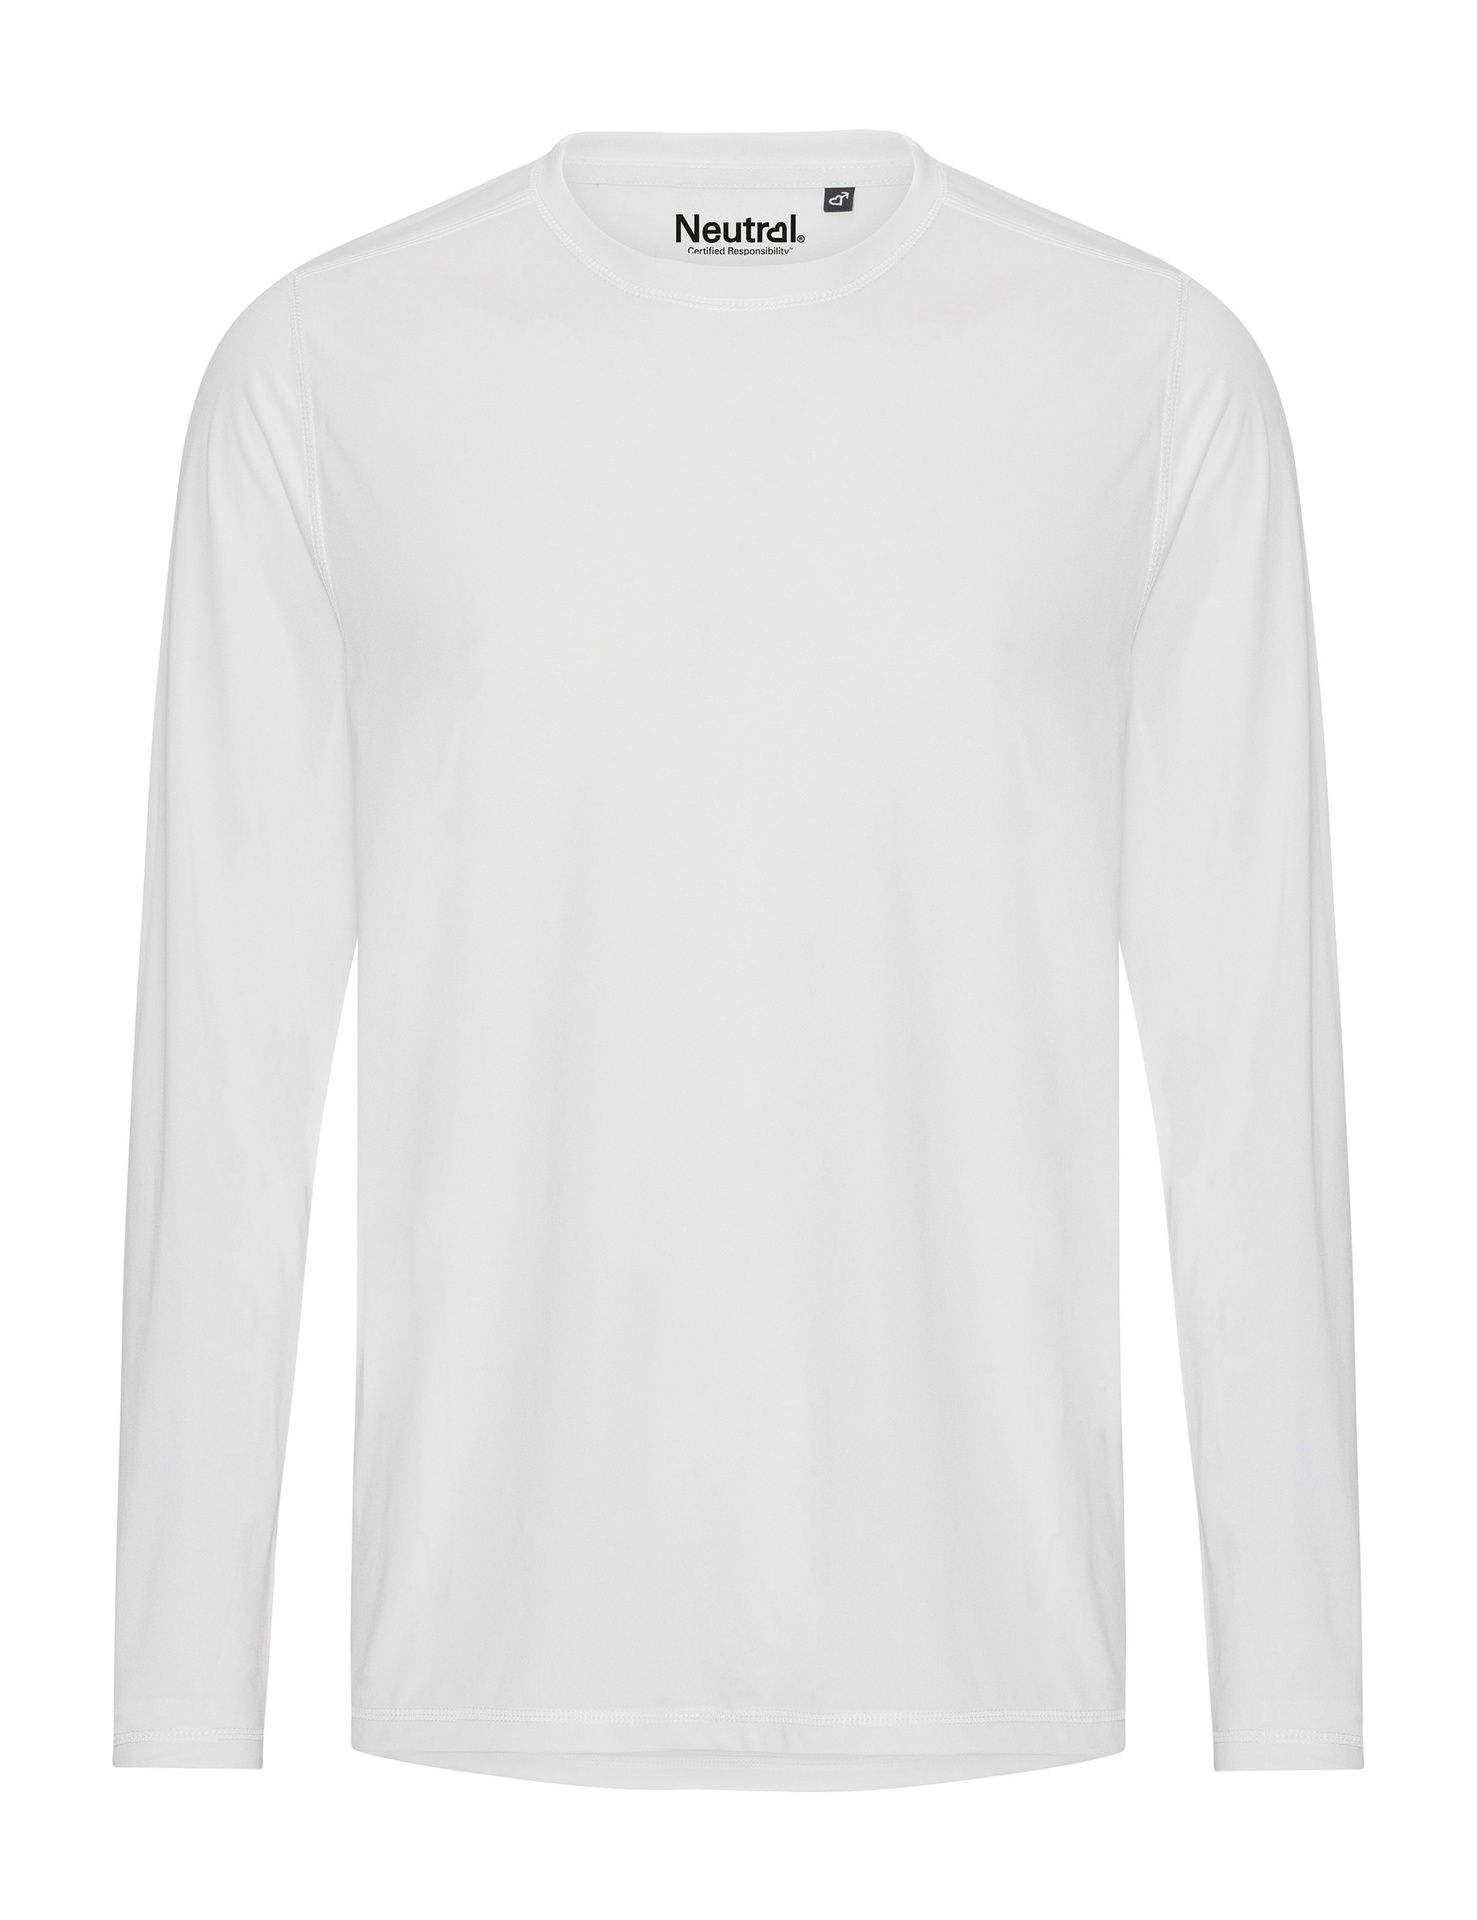 [PR/03820] Recycled Performance LS T-Shirt (White 01, S)